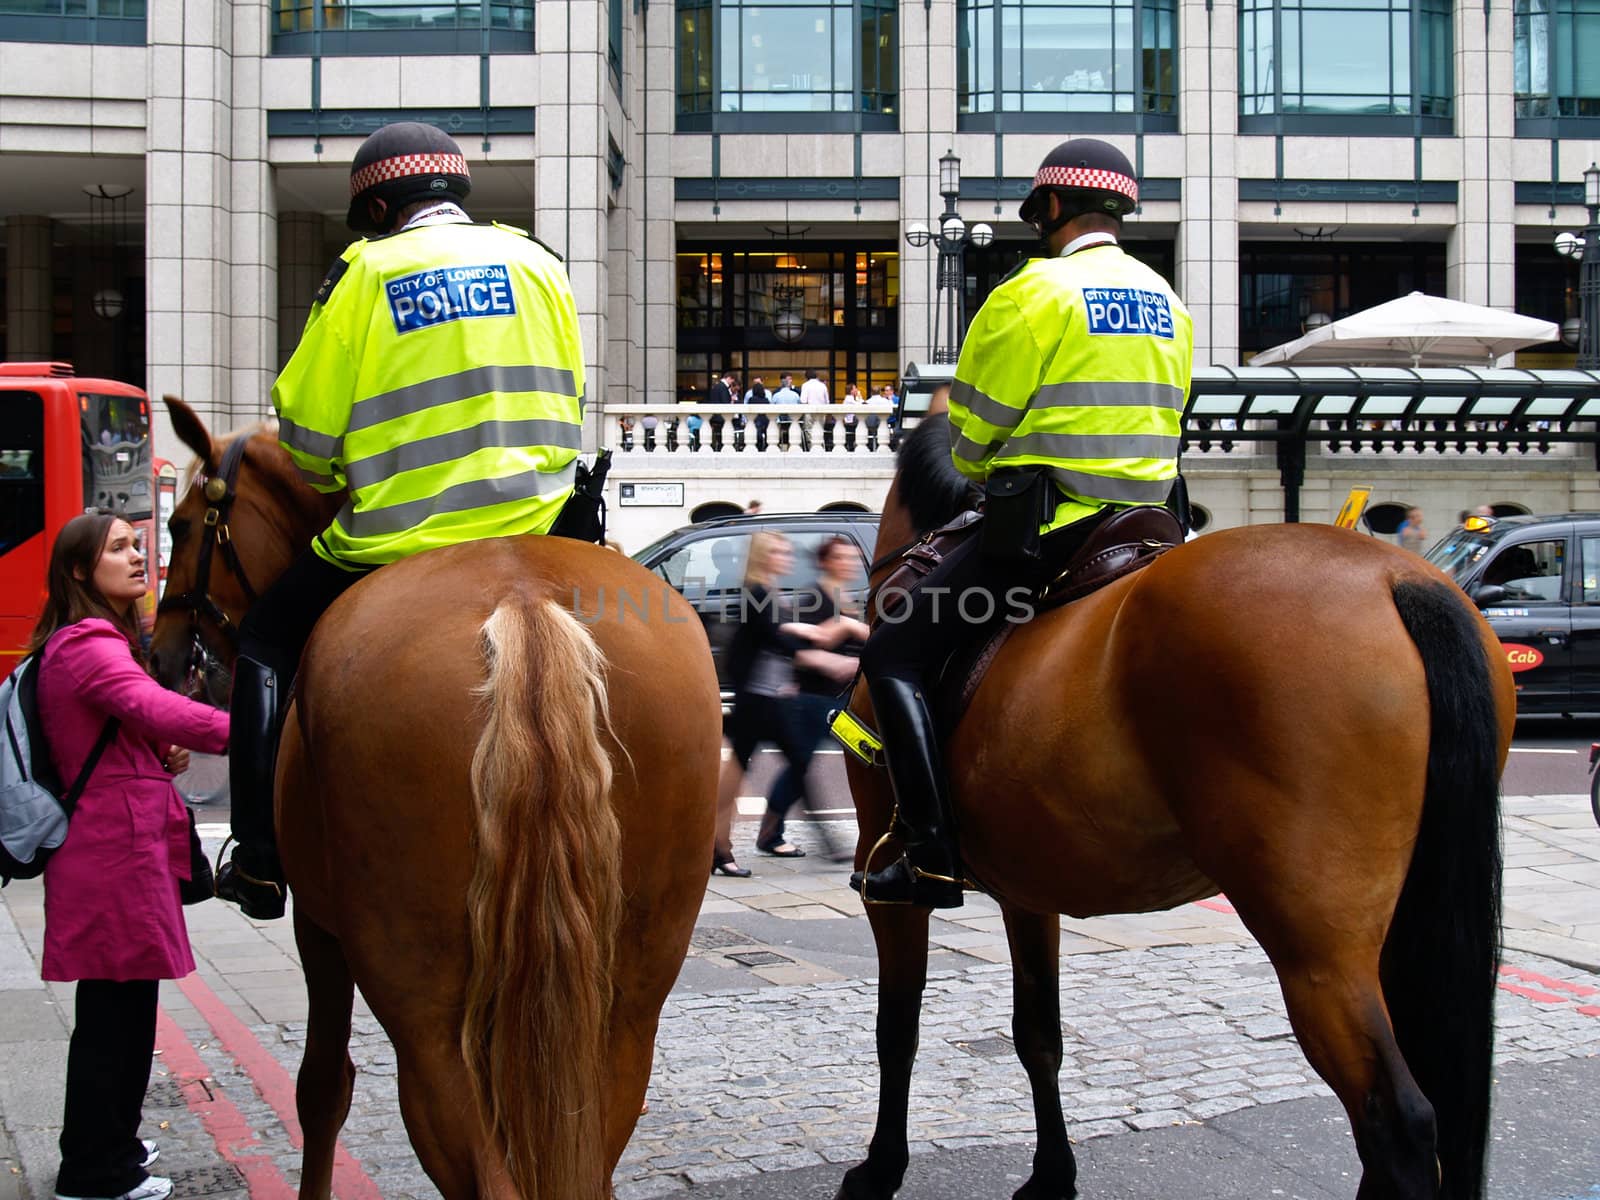 Mounted police in streets of London, England providing a law- keeping presence in 2009 talking with w woman in pink coat.The mounted unit was used in the recent London riots.